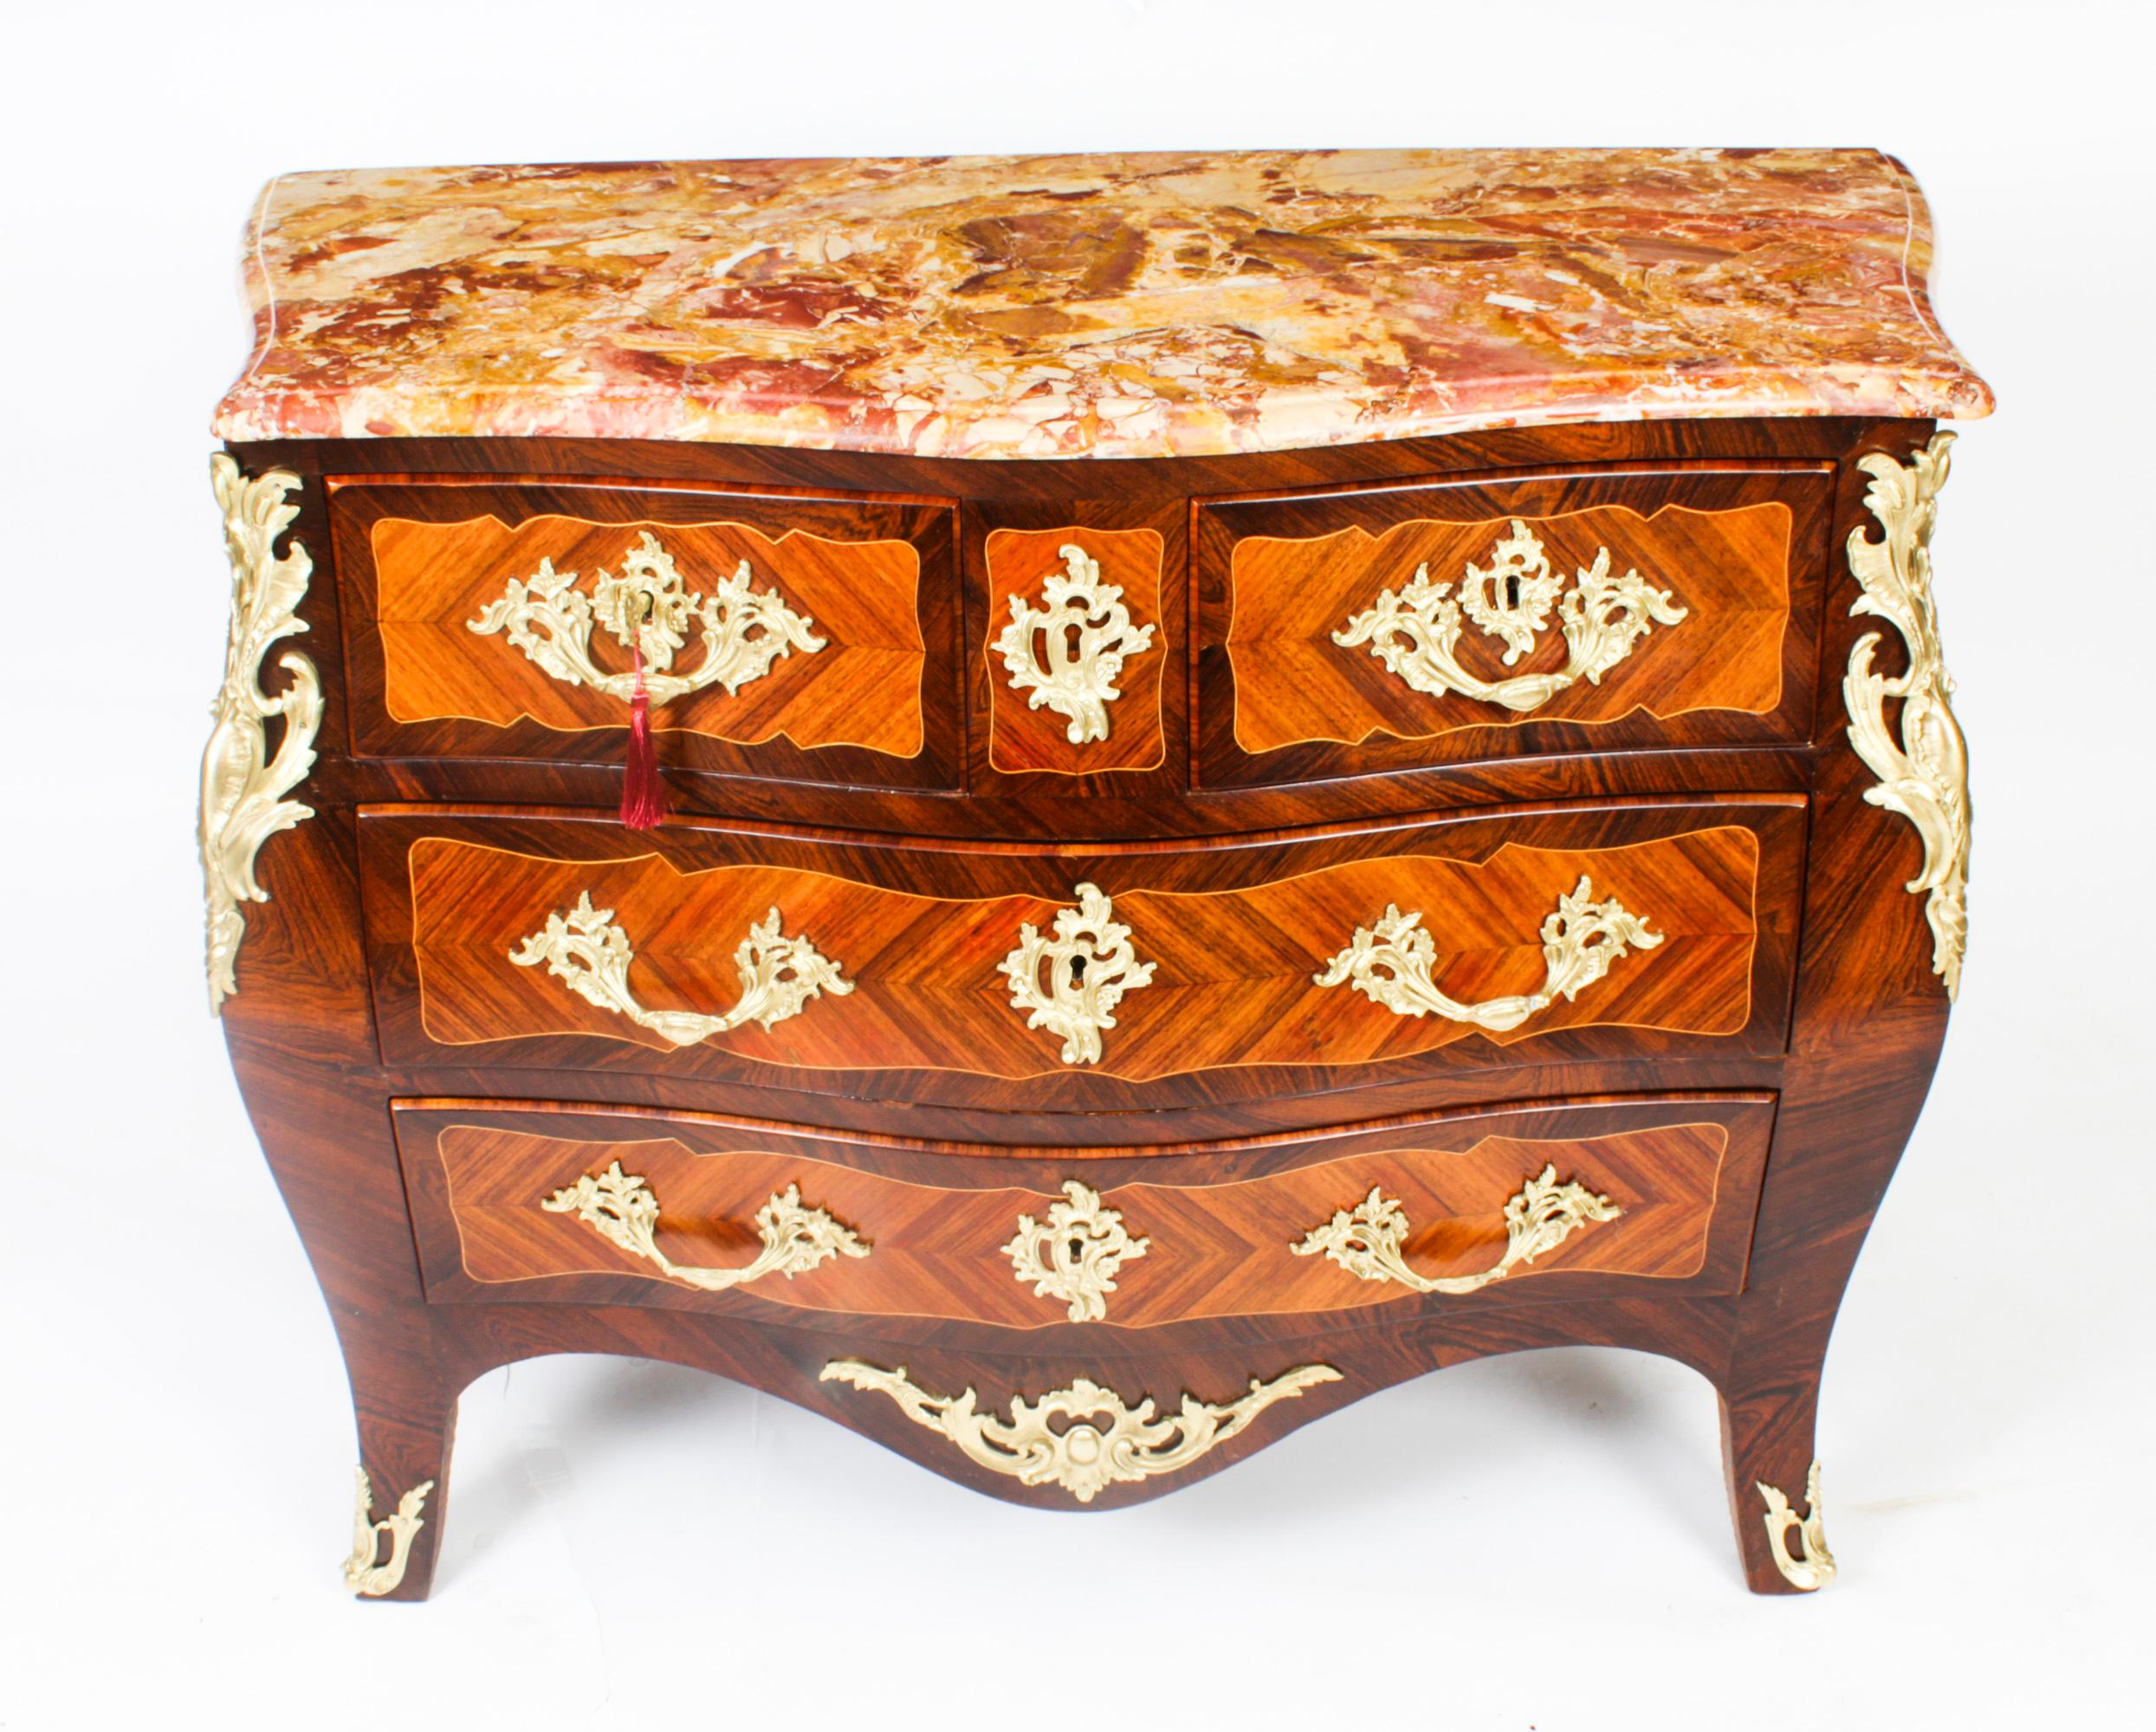 Antique French Louis XVI Marquetry Commode Chest 18th Century In Good Condition For Sale In London, GB